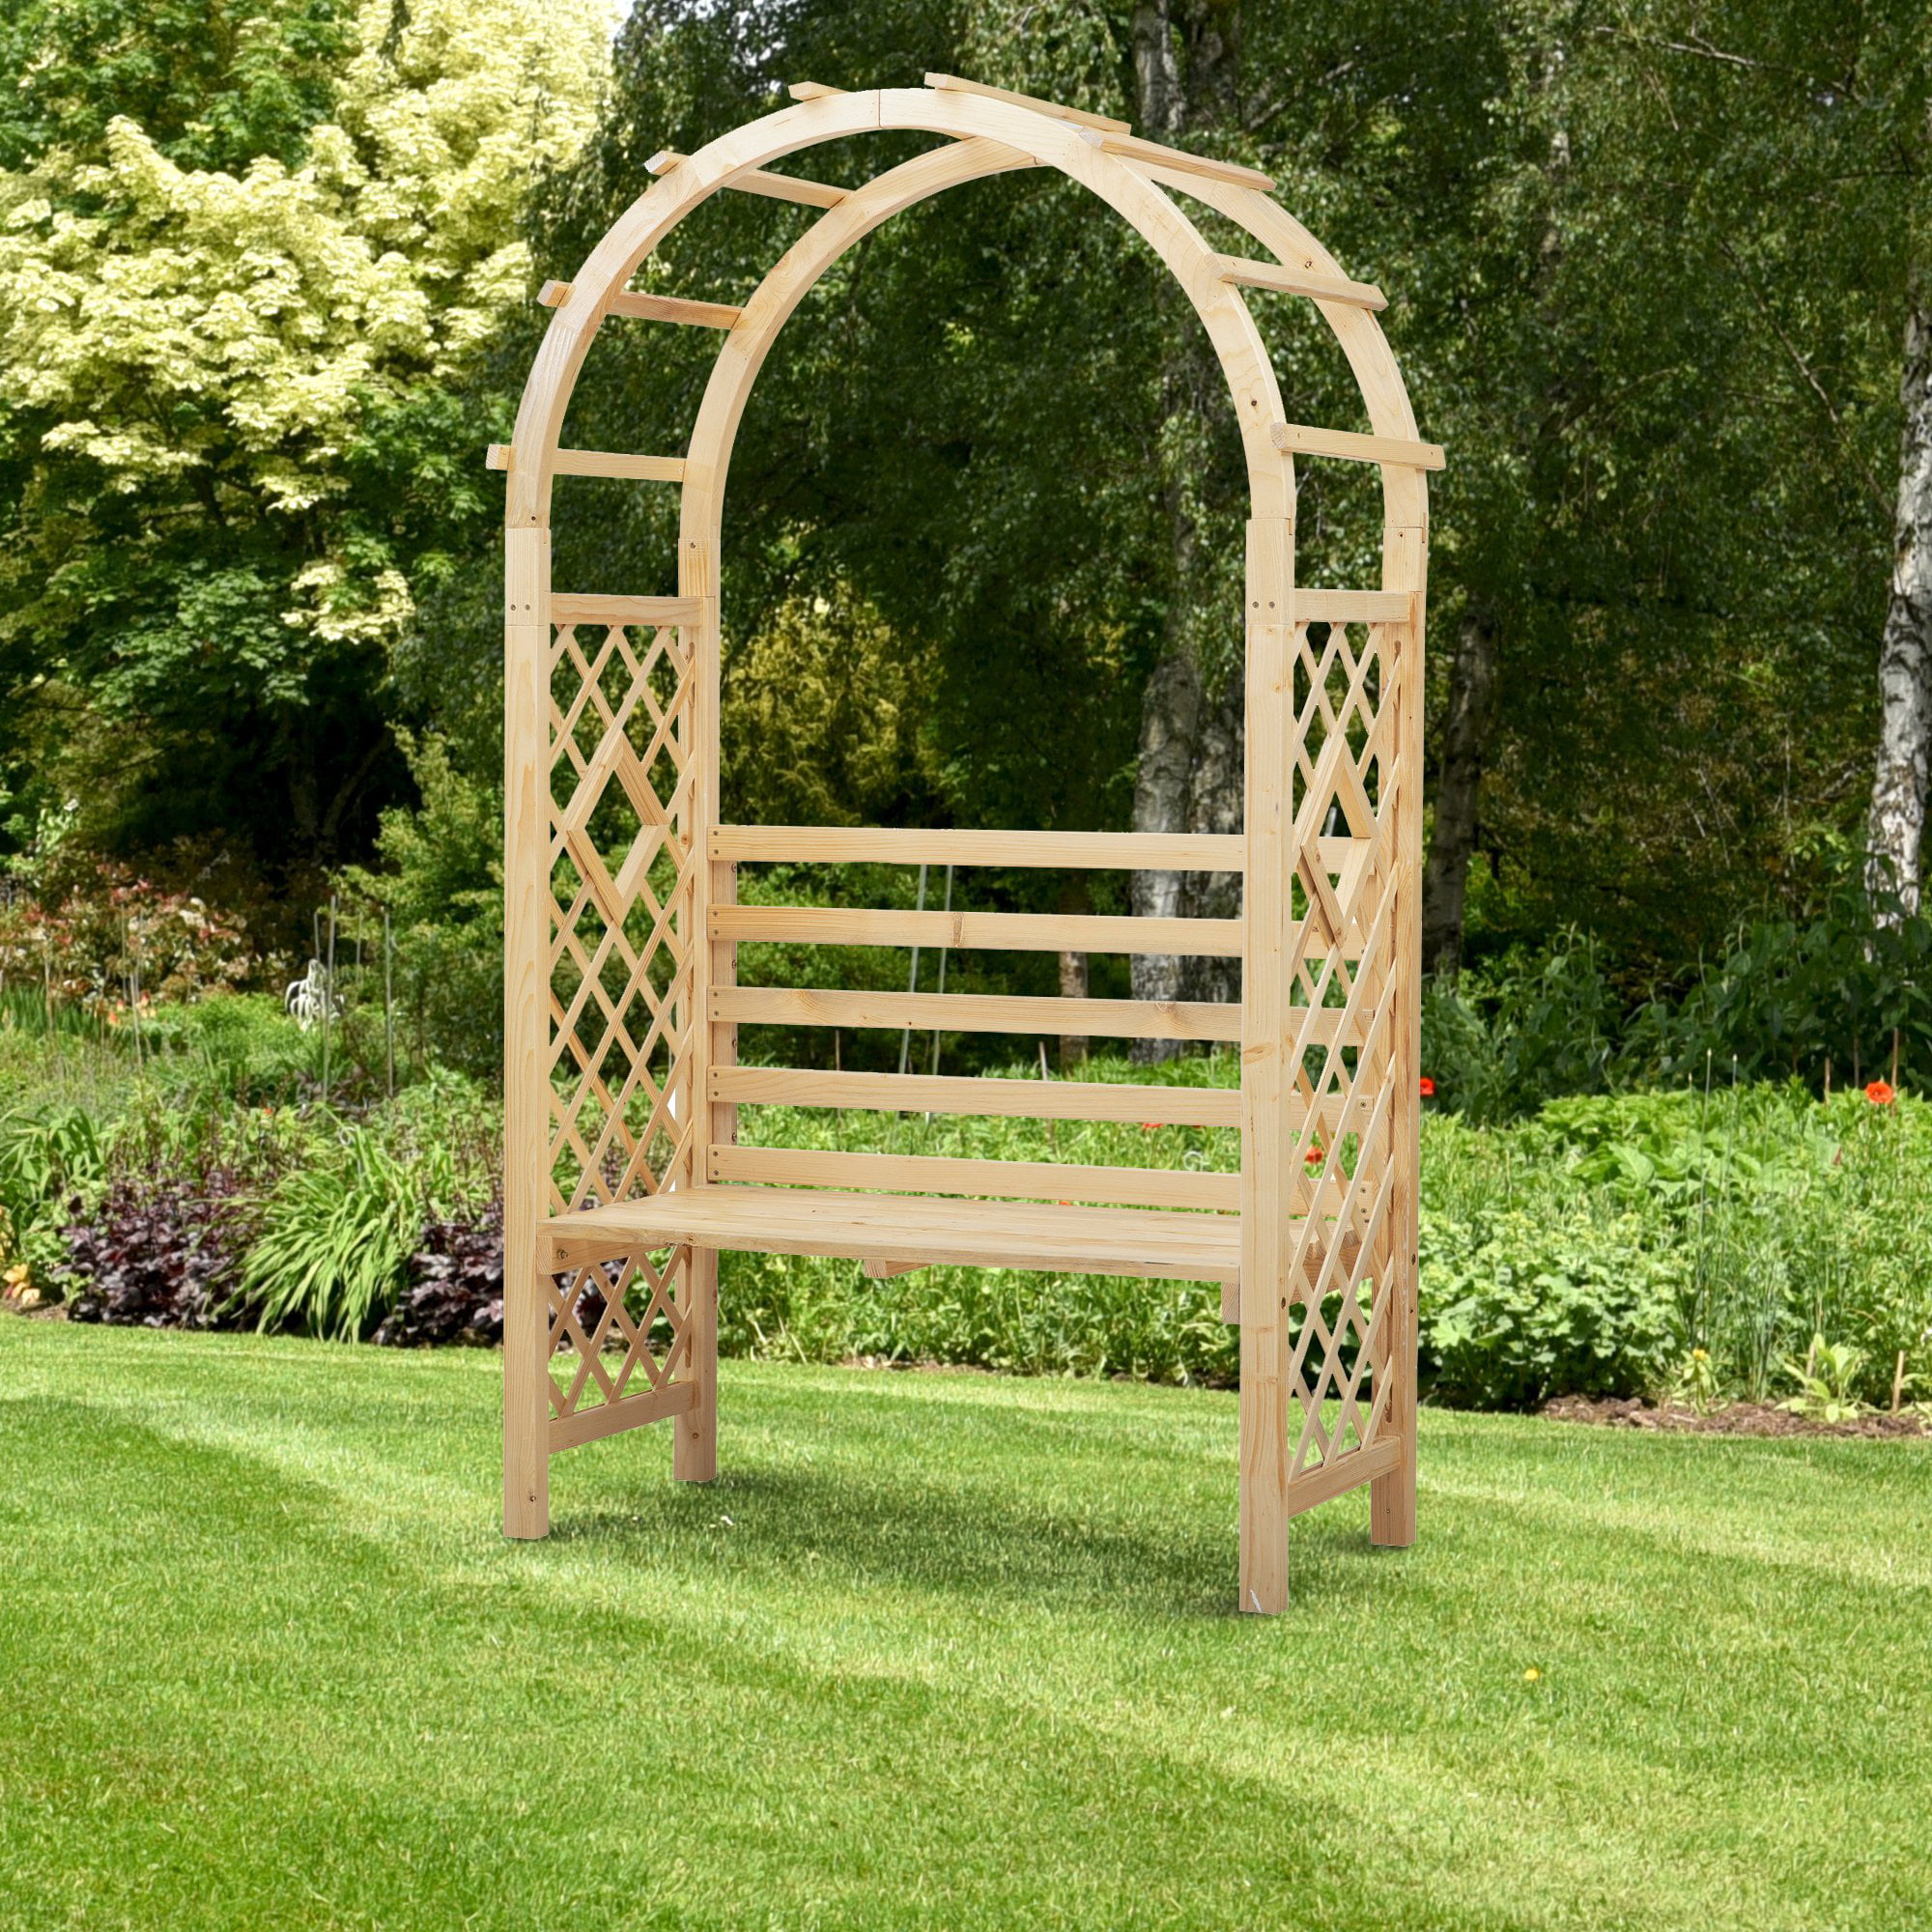 Wooden Metal Garden Arch Gate Arbour Rose Pergola Archway Patio Climbing Plant 